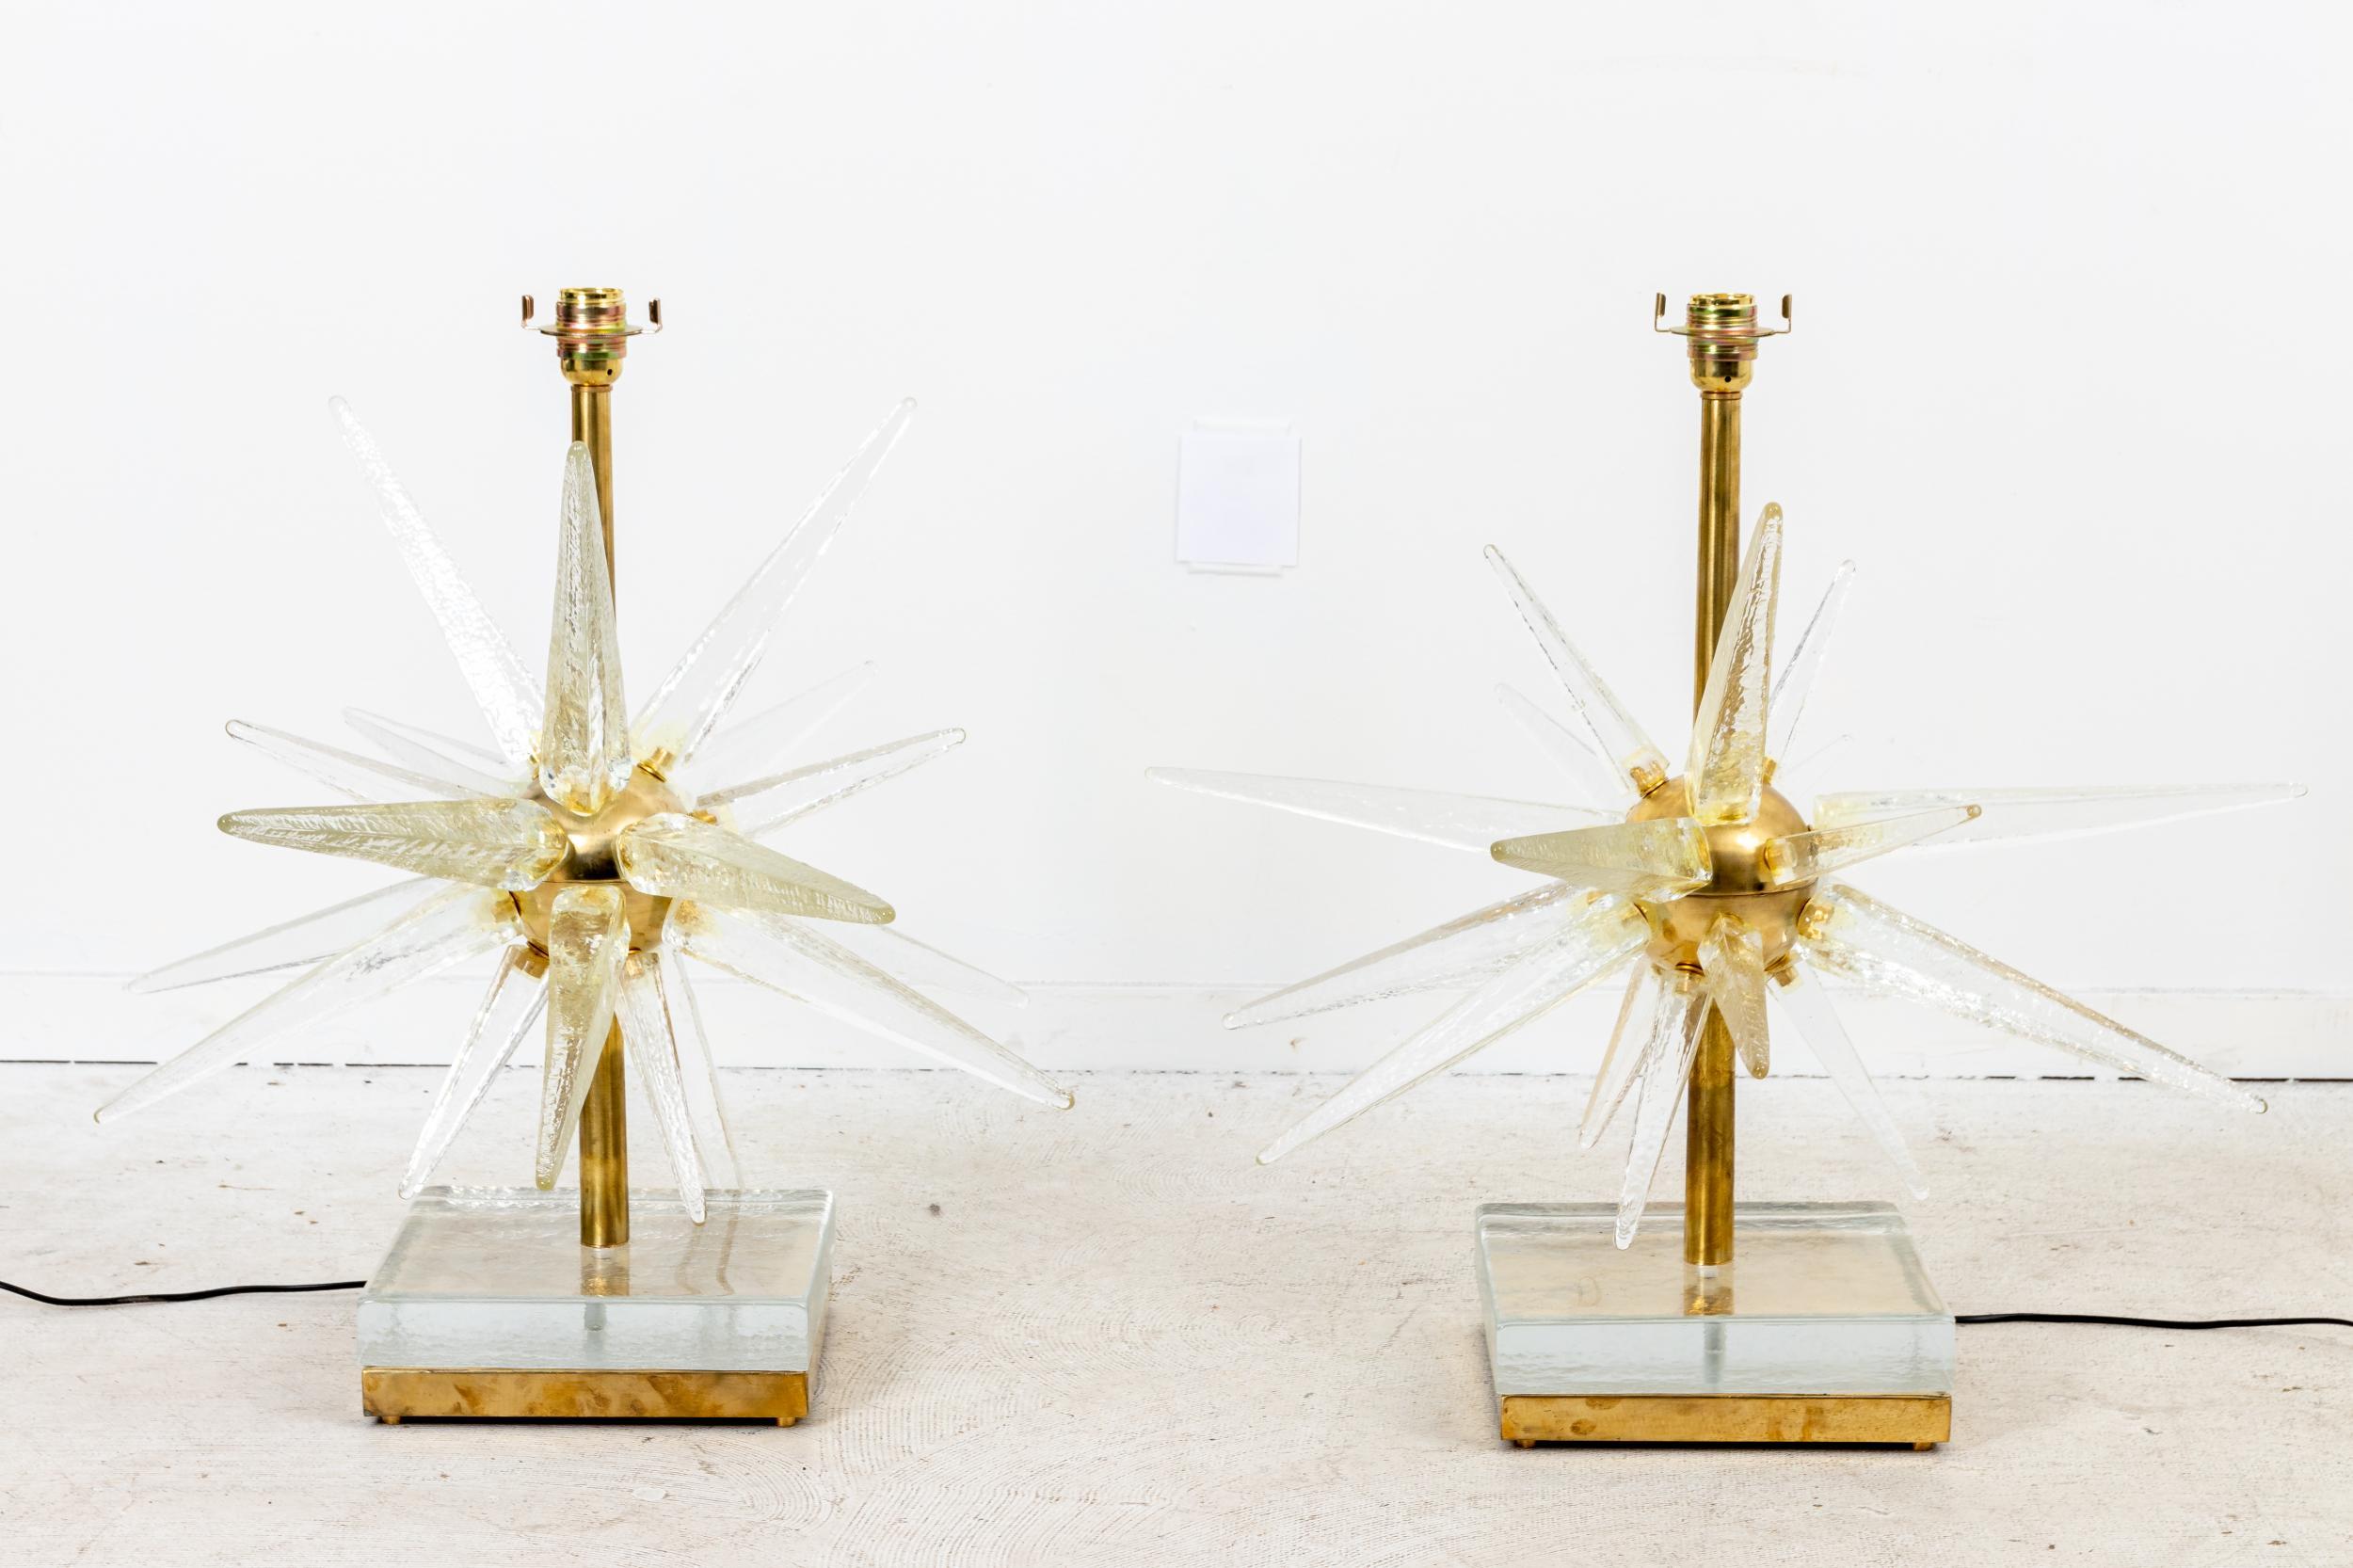 A pair of Murano glass starburst table lamps. This pair is made in Italy with molded glass radiating off a brass center. Each glass ray has slight variations, showing the handmade quality. A thick glass block sits atop the brass base, reflecting a